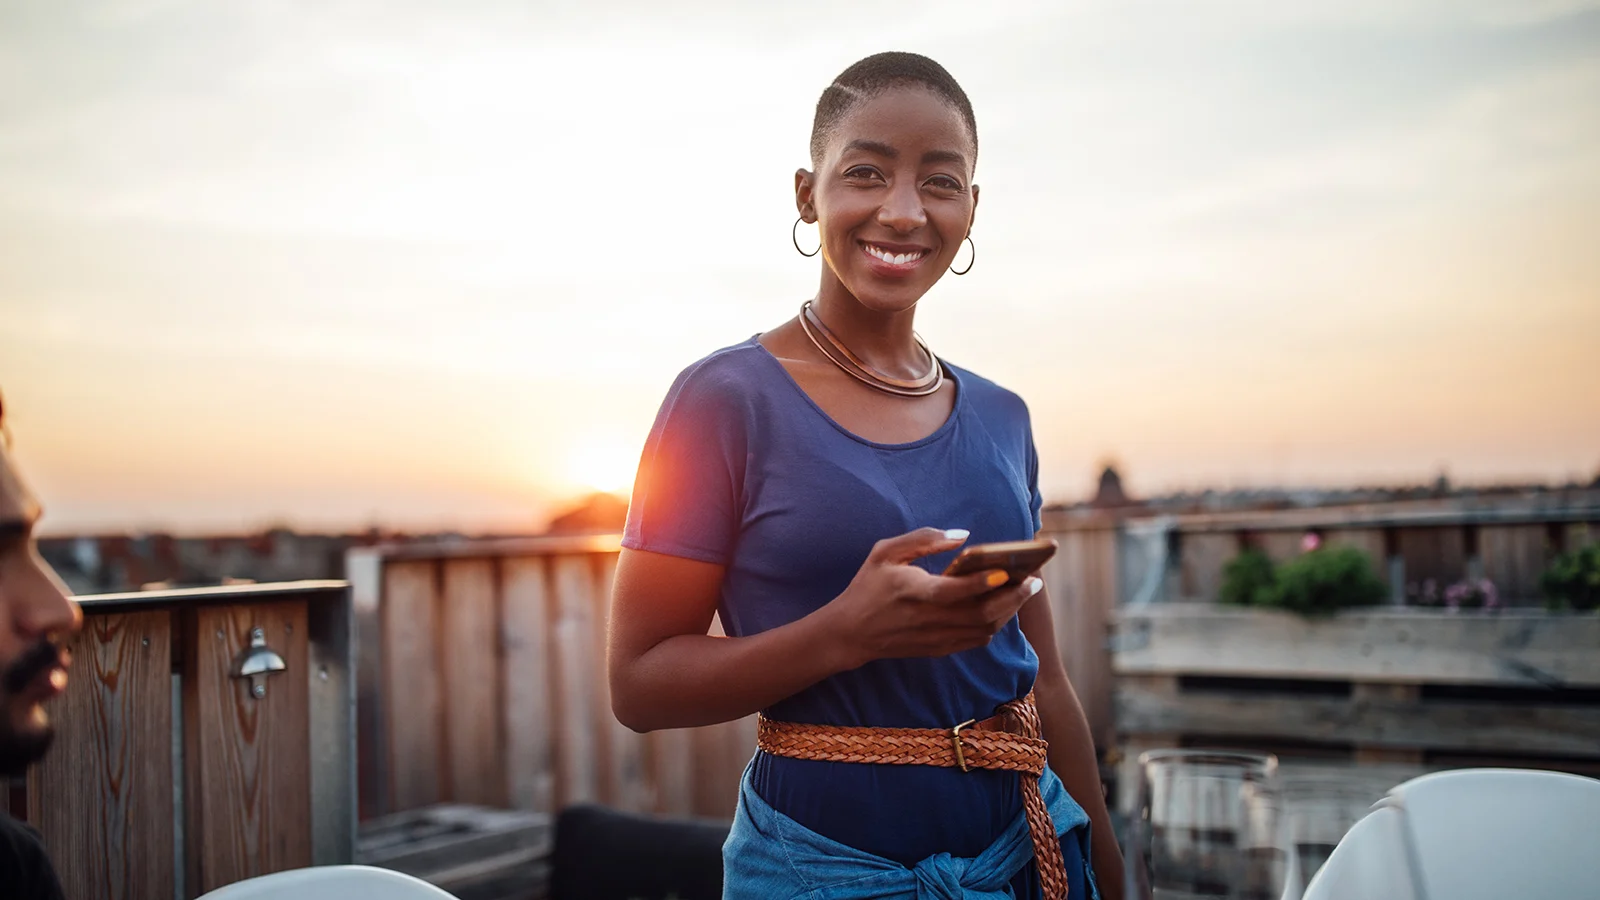 Putting policyholders first - Woman smiling in front of a sunset and holding her mobile phone